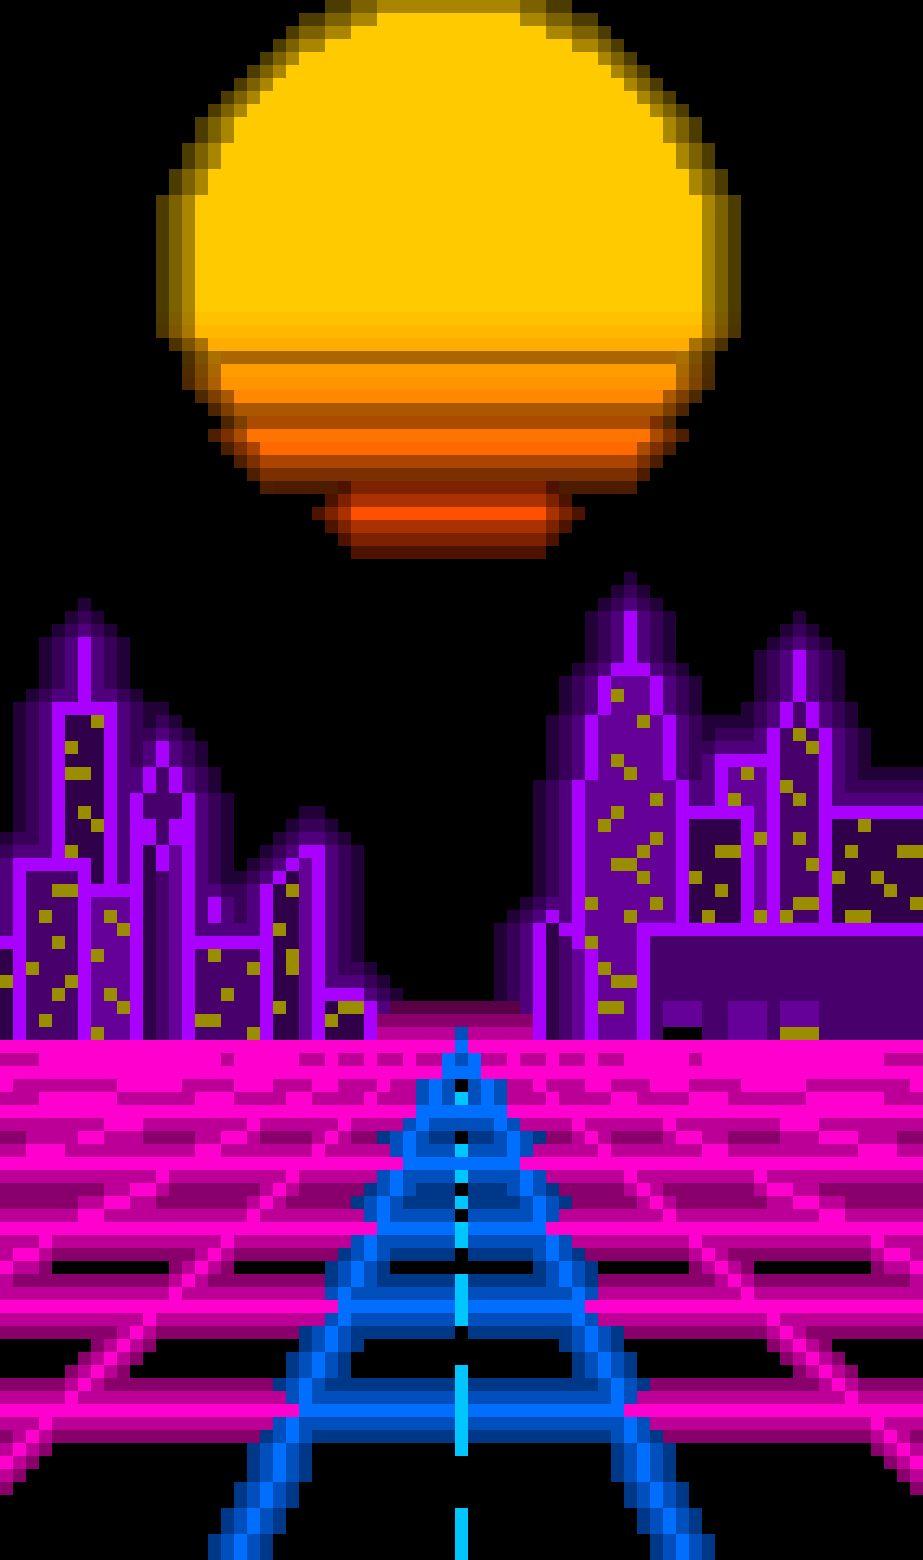 I wanted to make a pixel art outrun phone wallpaper. How did I do